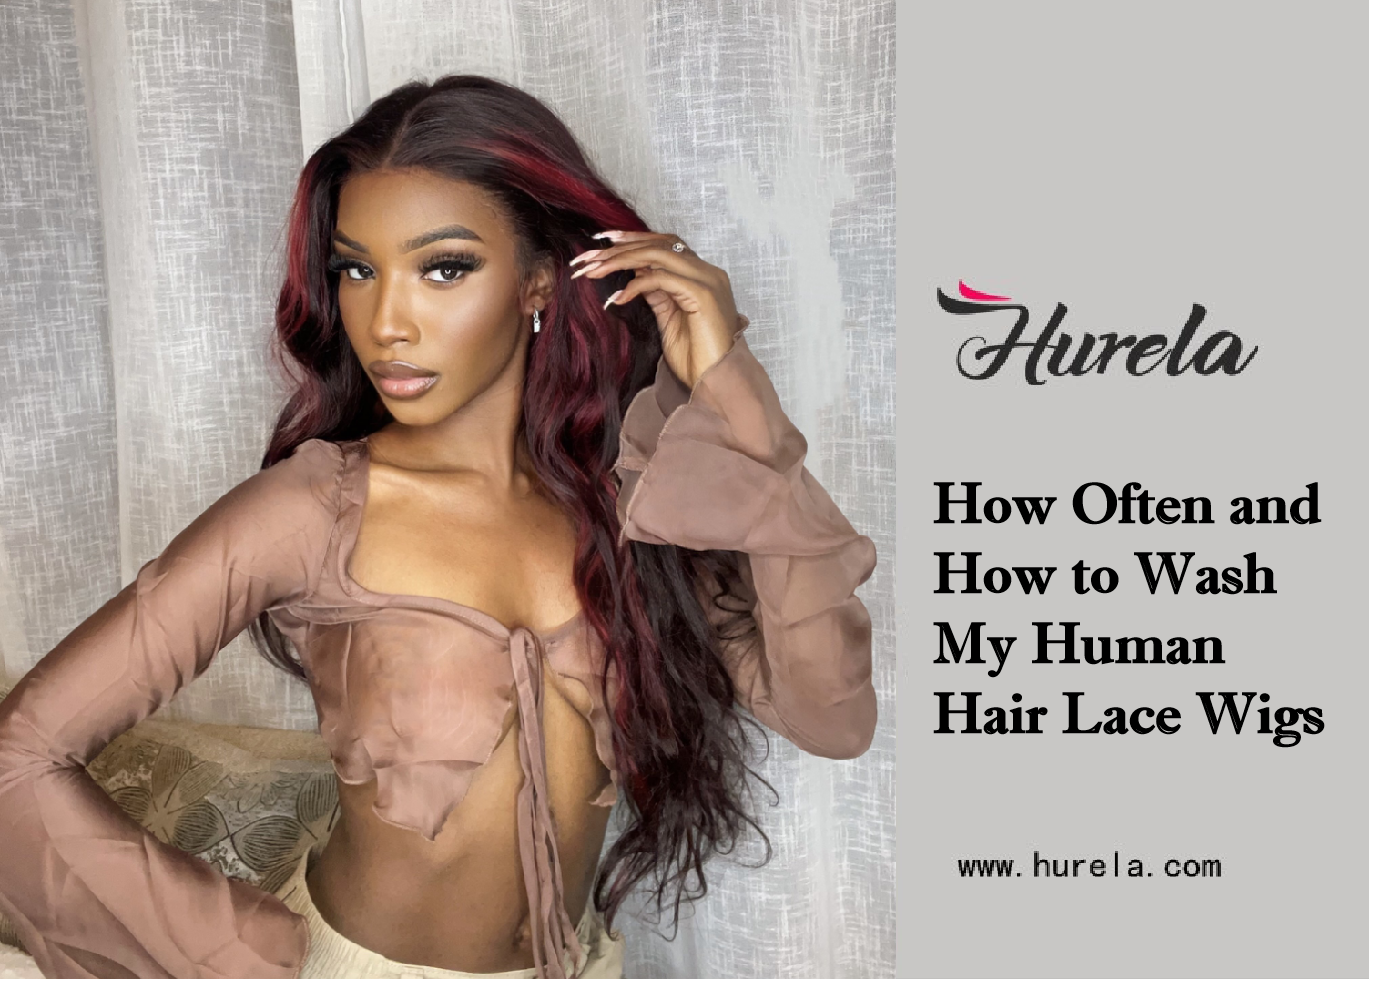 human hair wigs, lace front wigs, wash wigs